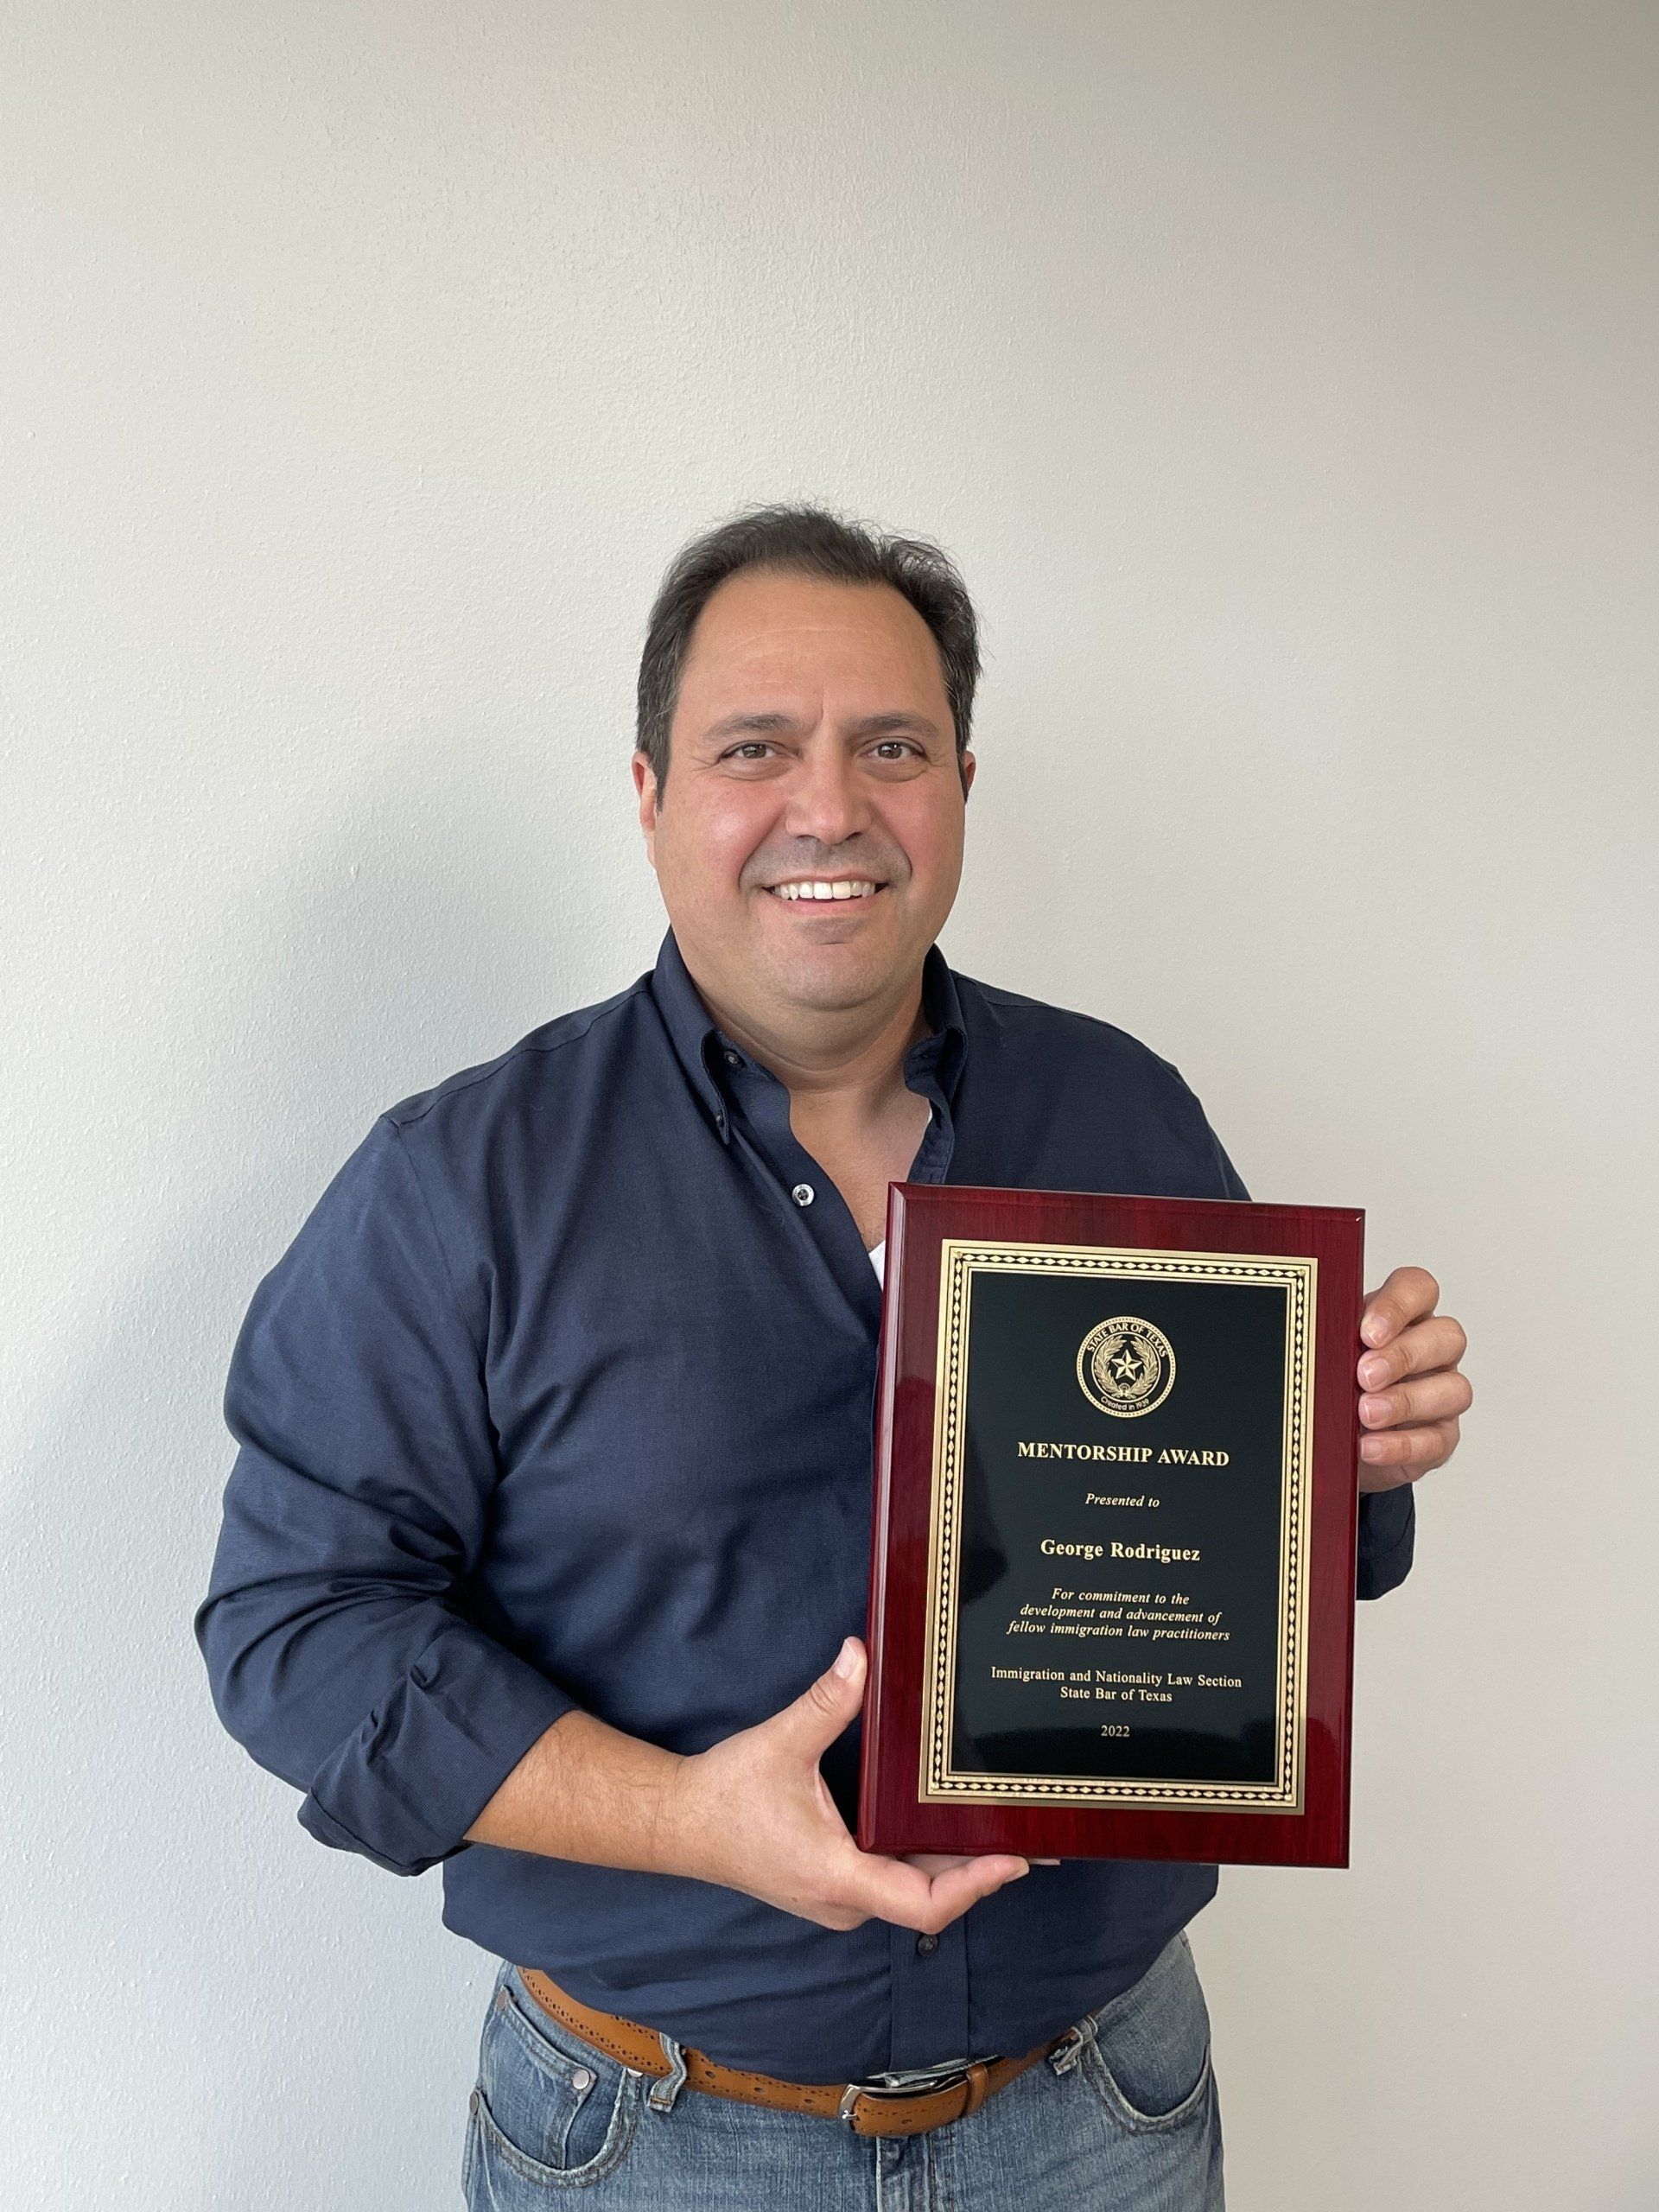 George holding the the Mentorship Award as the 2022 honoree from the State Bar of Texas' Immigration & Nationality Section.